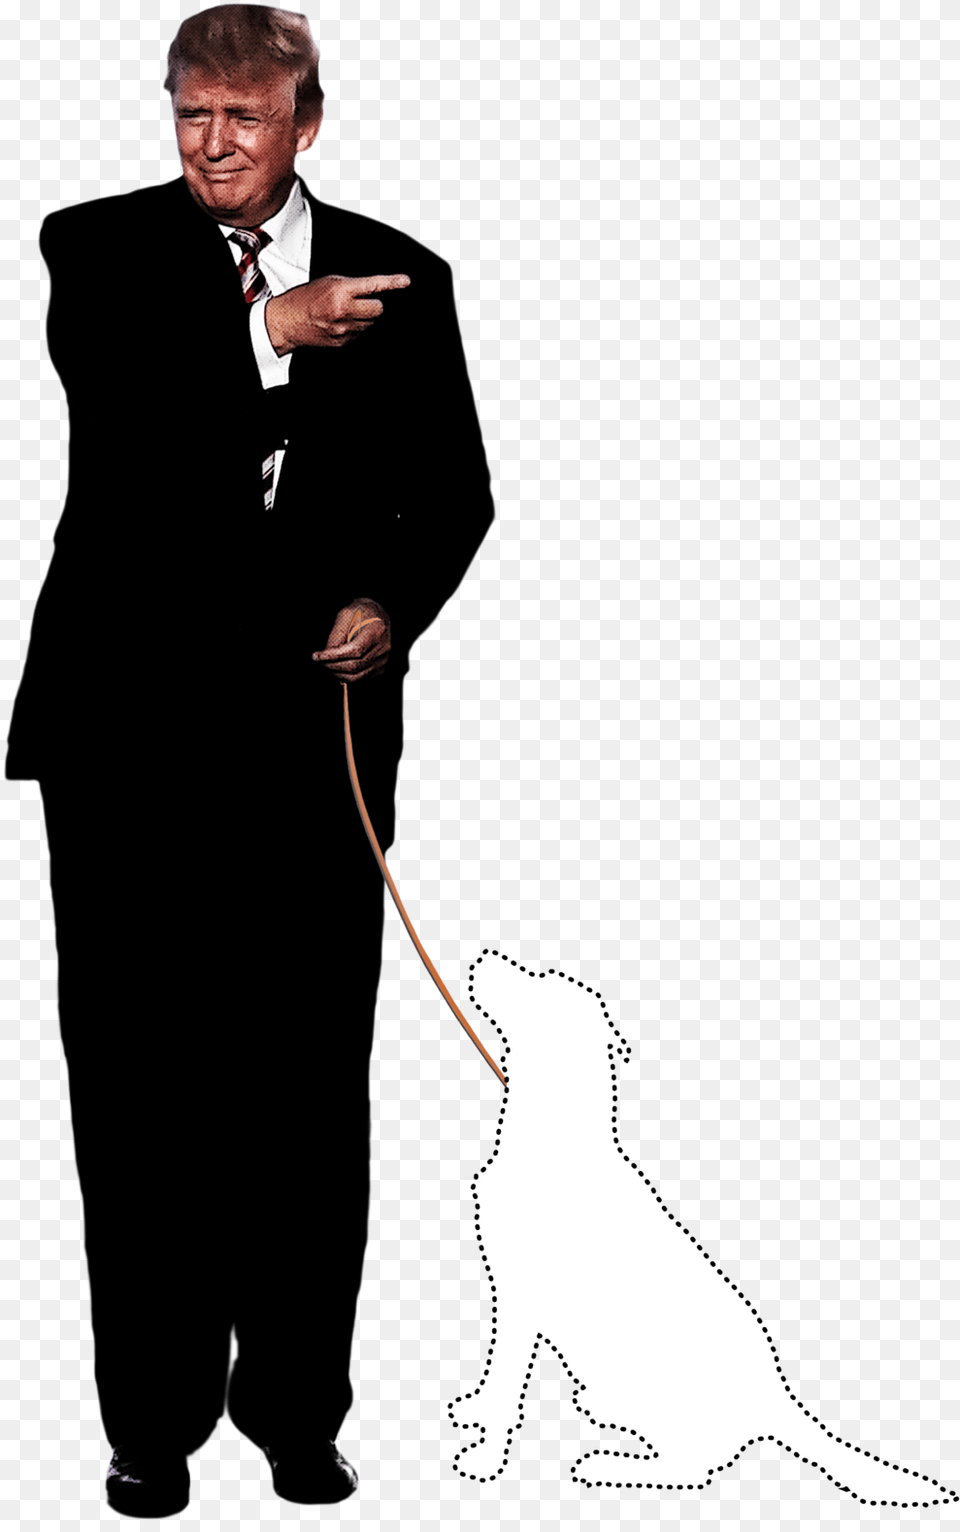 Ronald Reagan Had Rex A Cavalier King Charles Spaniel Tuxedo, Suit, Clothing, Formal Wear, Person Png